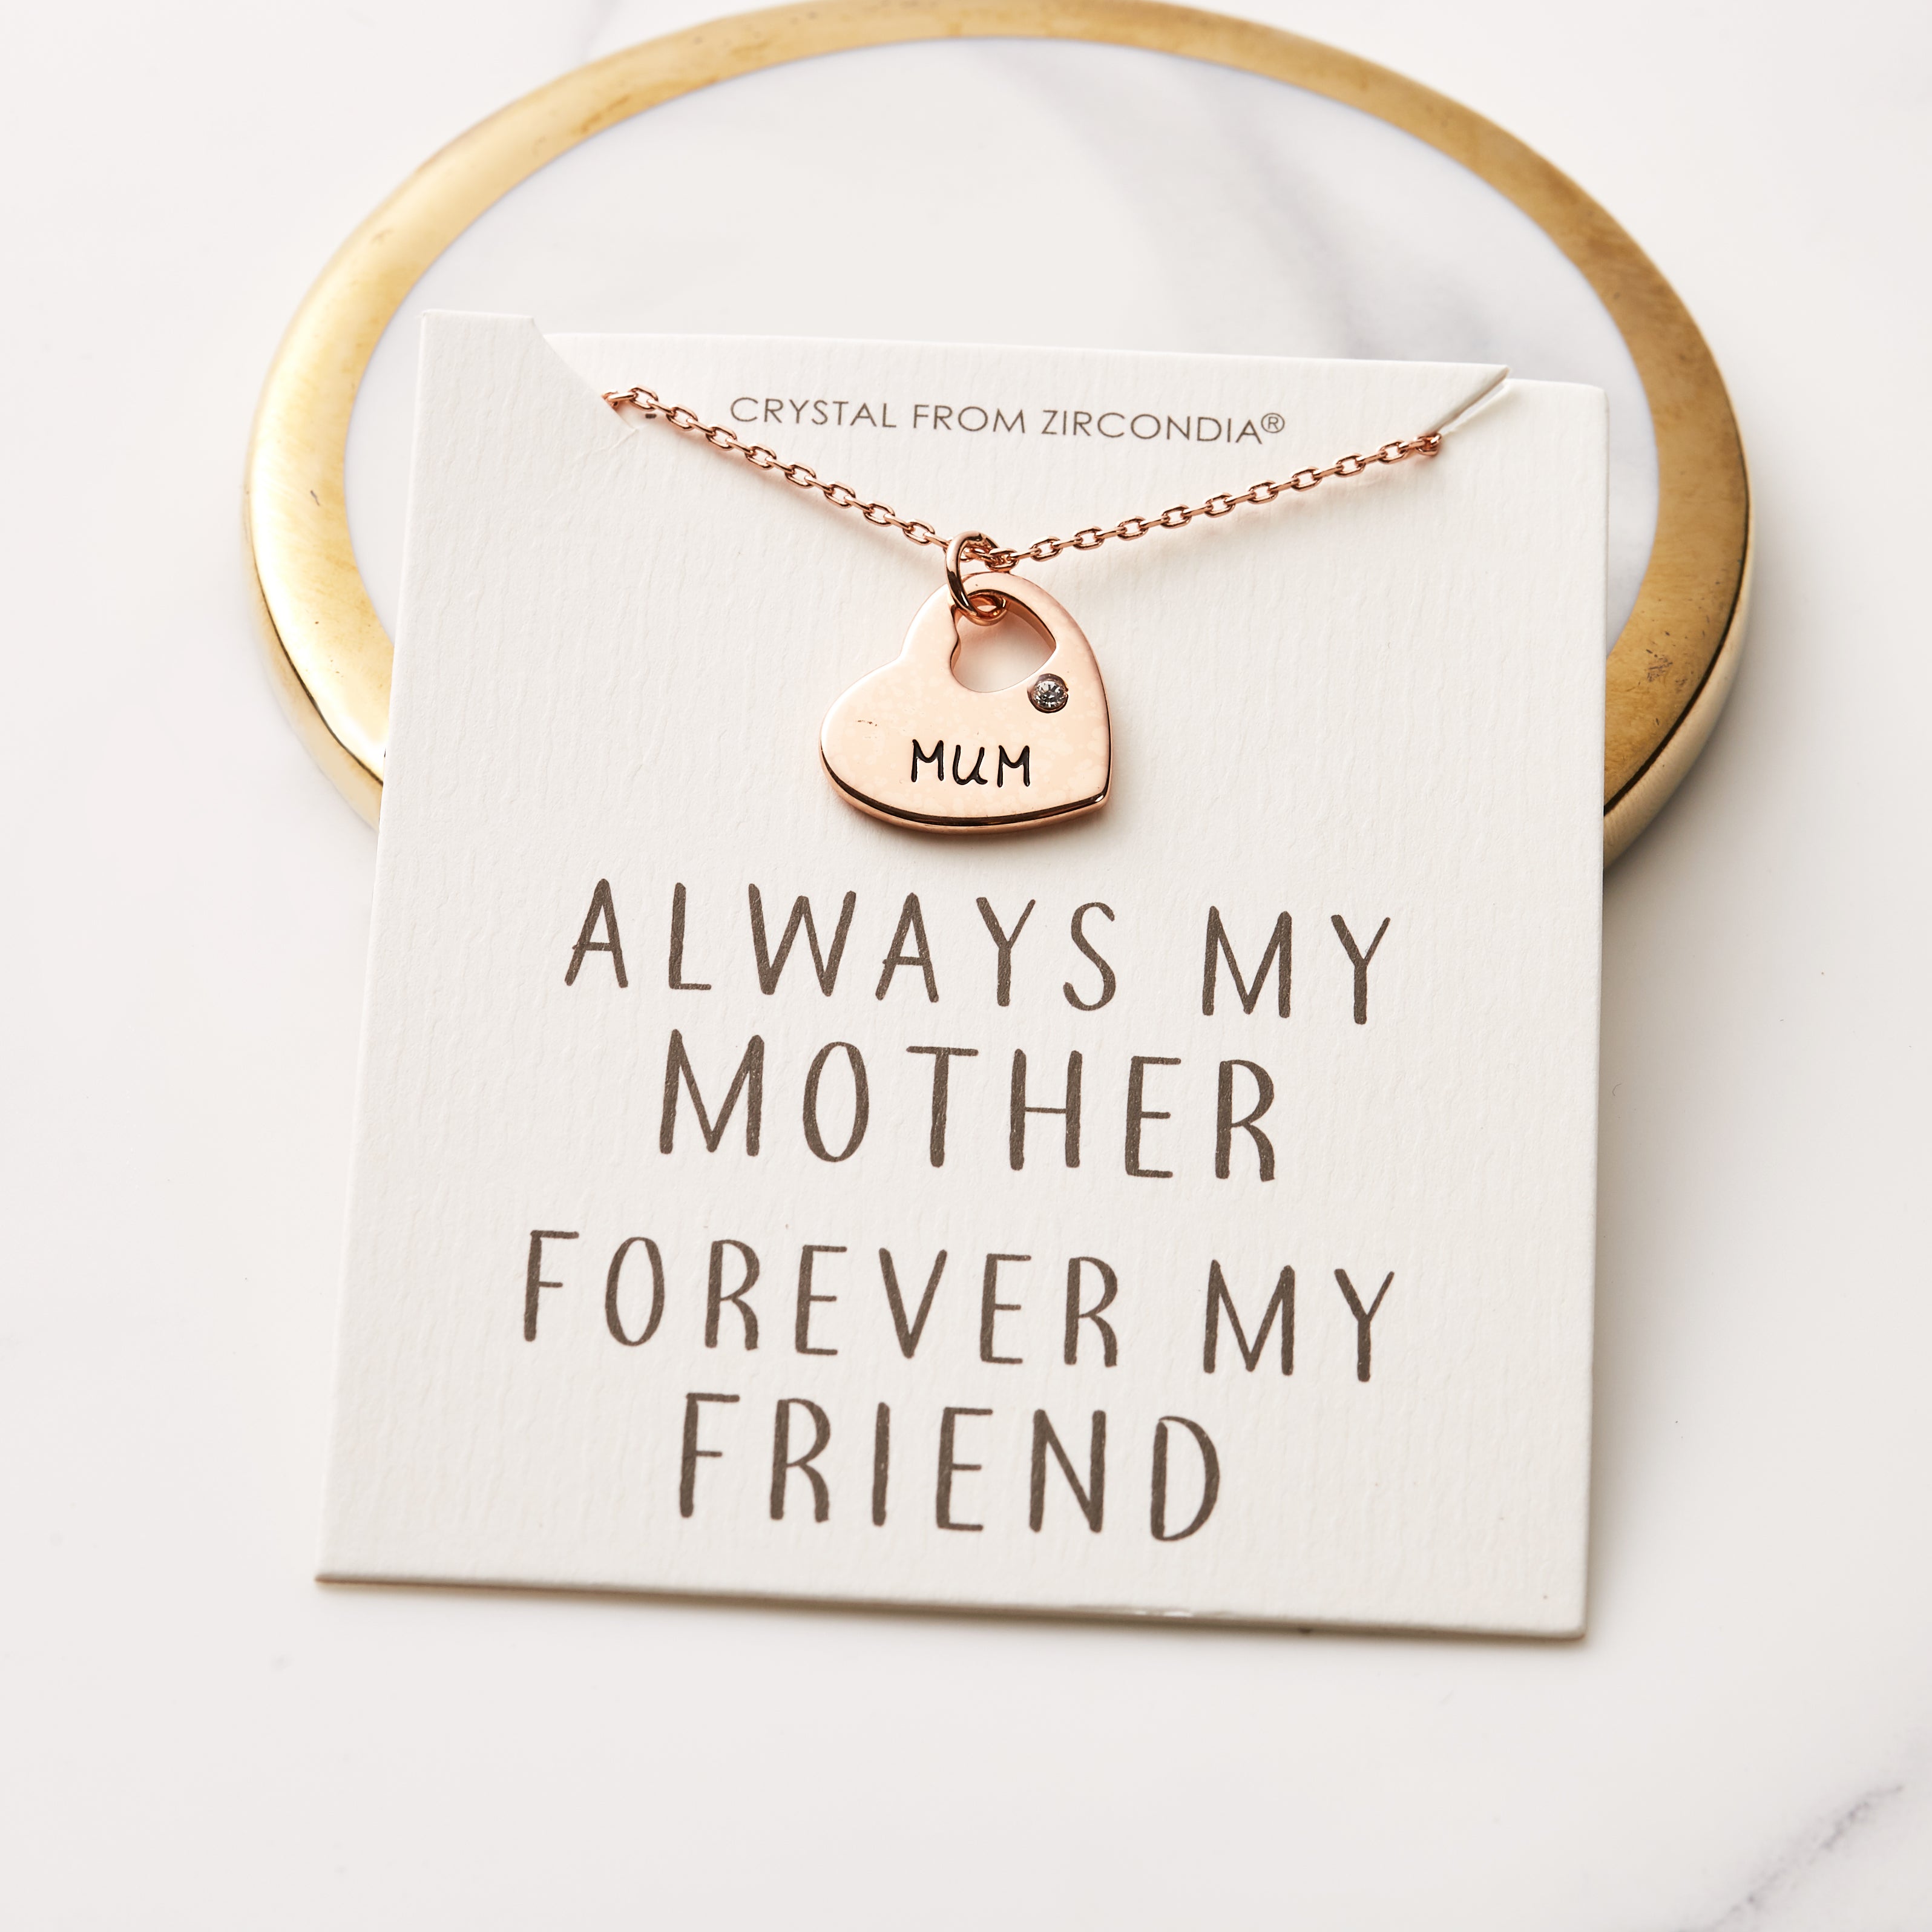 Rose Gold Plated Mum Heart Necklace with Quote Card Created with Zircondia® Crystals